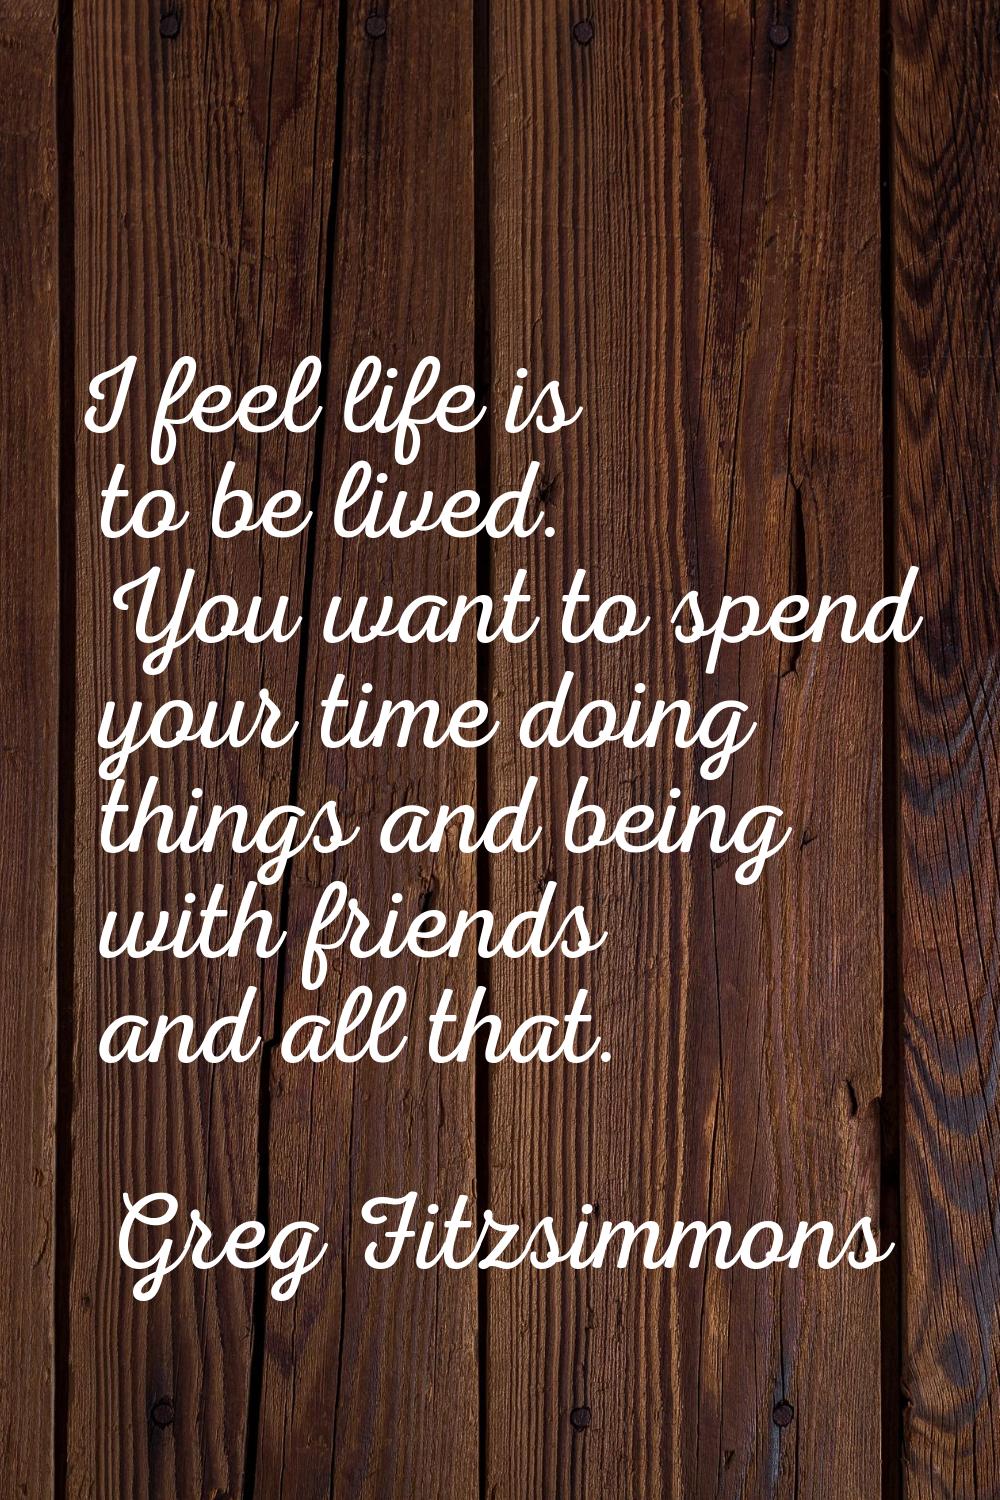 I feel life is to be lived. You want to spend your time doing things and being with friends and all